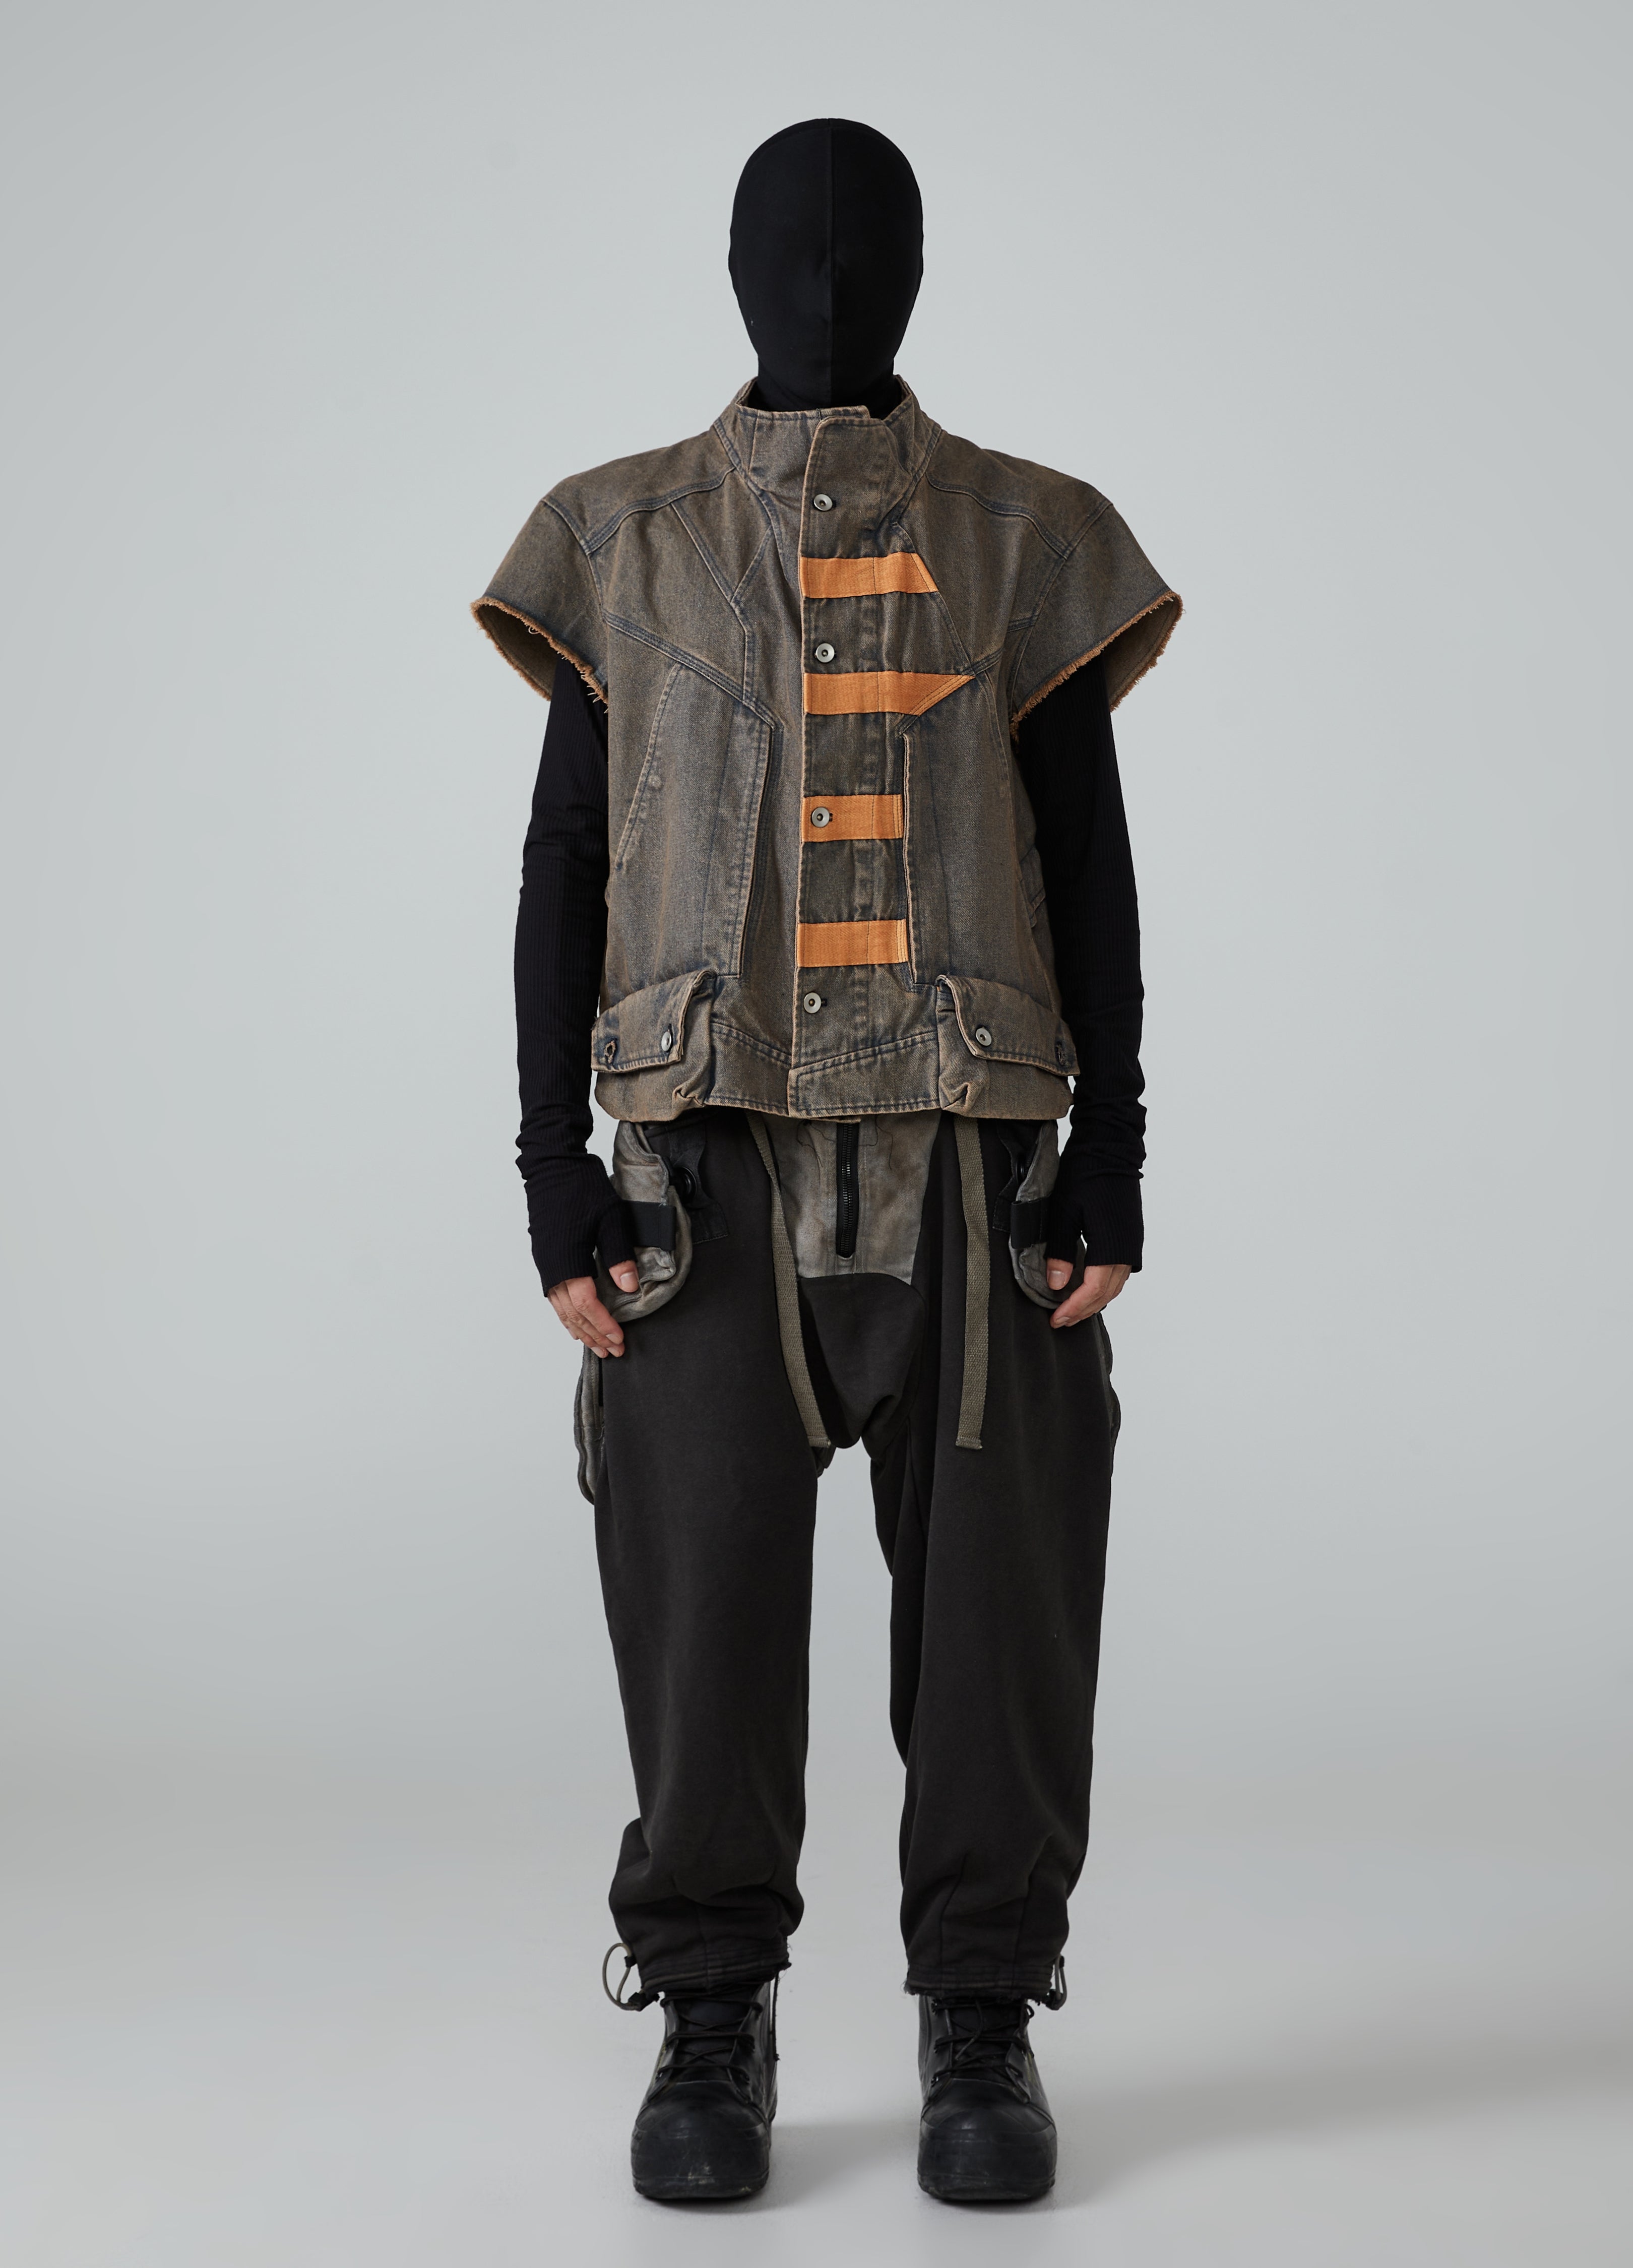 Wasteland Patchwork Workwear Casual Pants